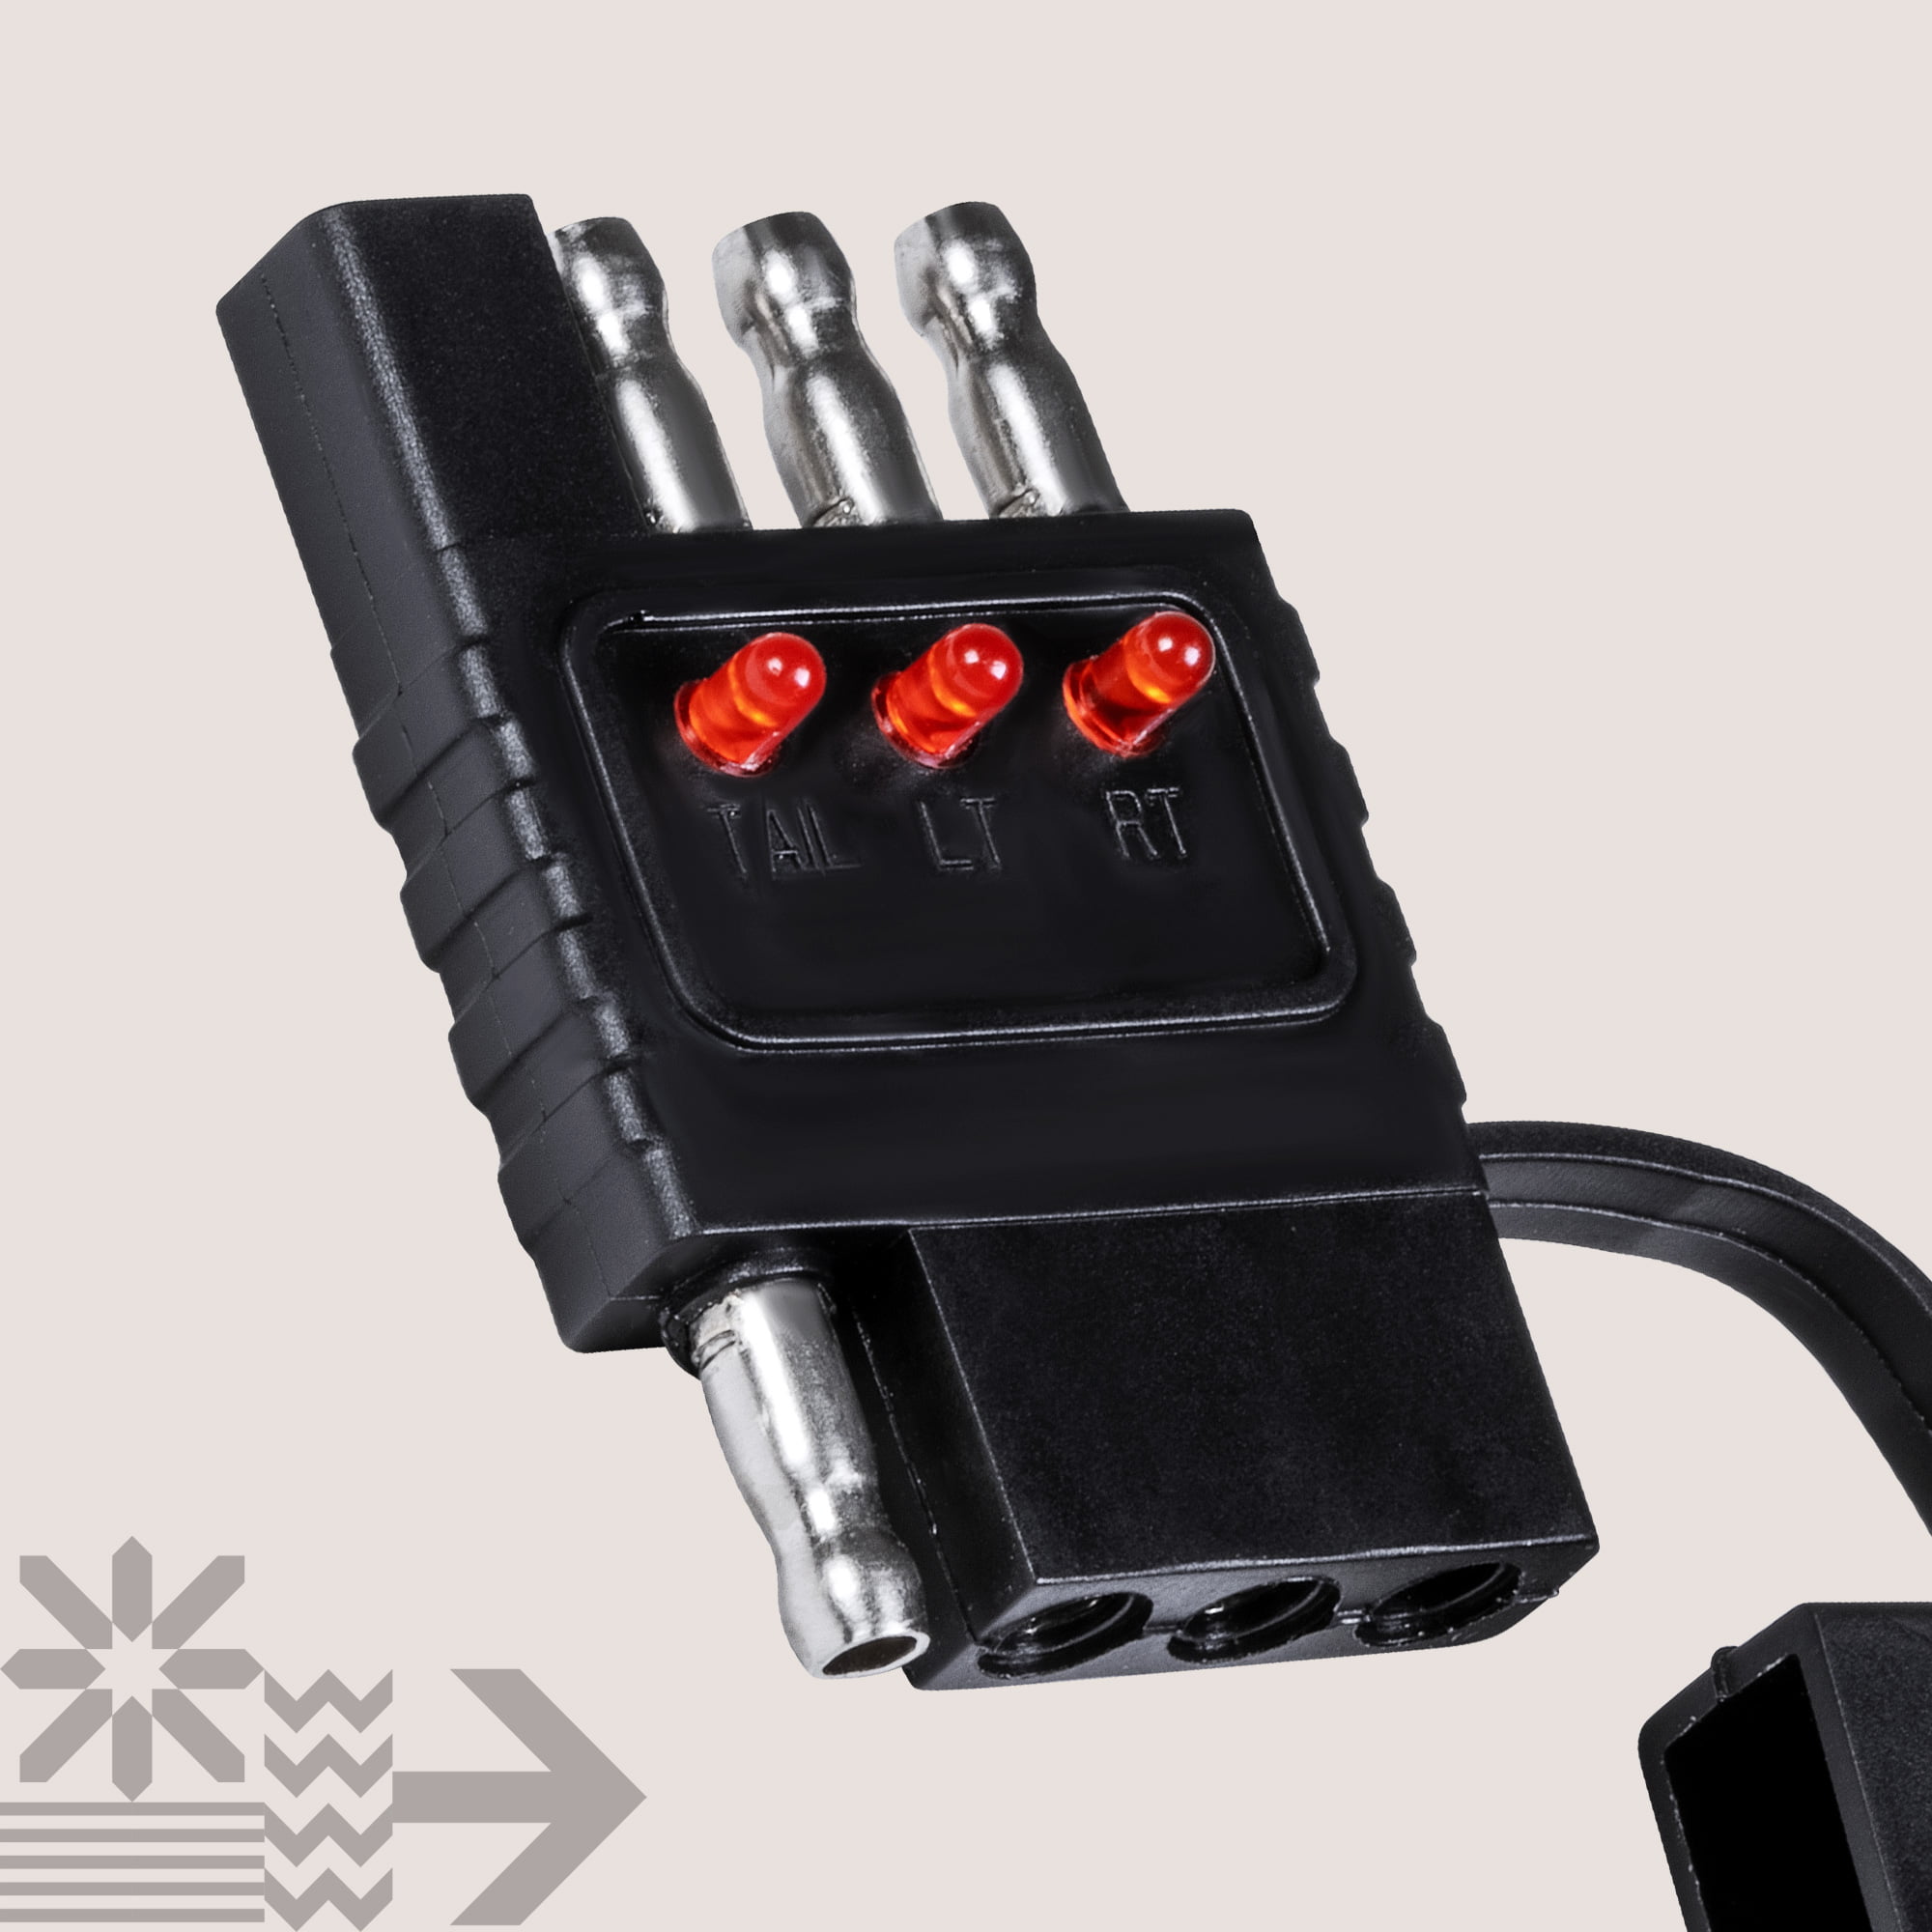 Oyviny 4-Way Flat Trailer Wiring Tester 4 Pin Male and Female Trailer  Tester with Bright Indicators, Double End Design 4 Pin Trailer Light Tester  for Turn Signal Tail Lights Trouble Shooter : Automotive 